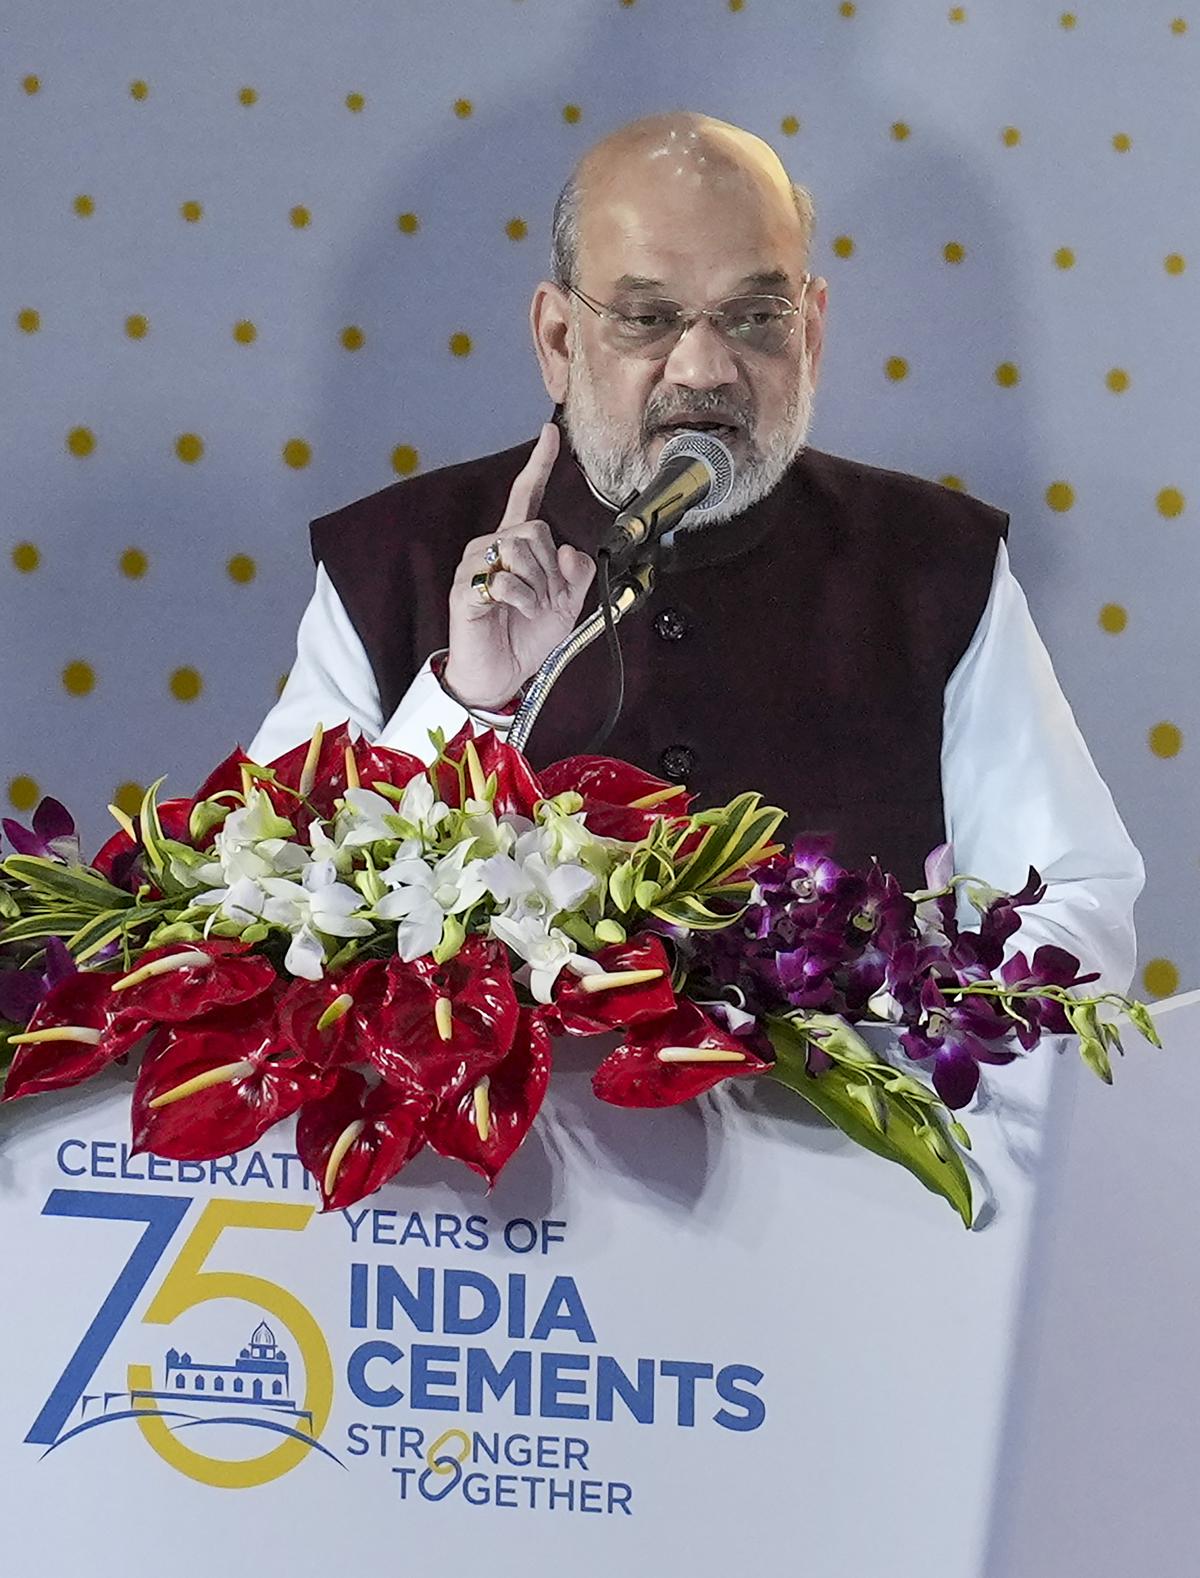 Amit Shah asks T.N. BJP leaders to focus on strengthening the party